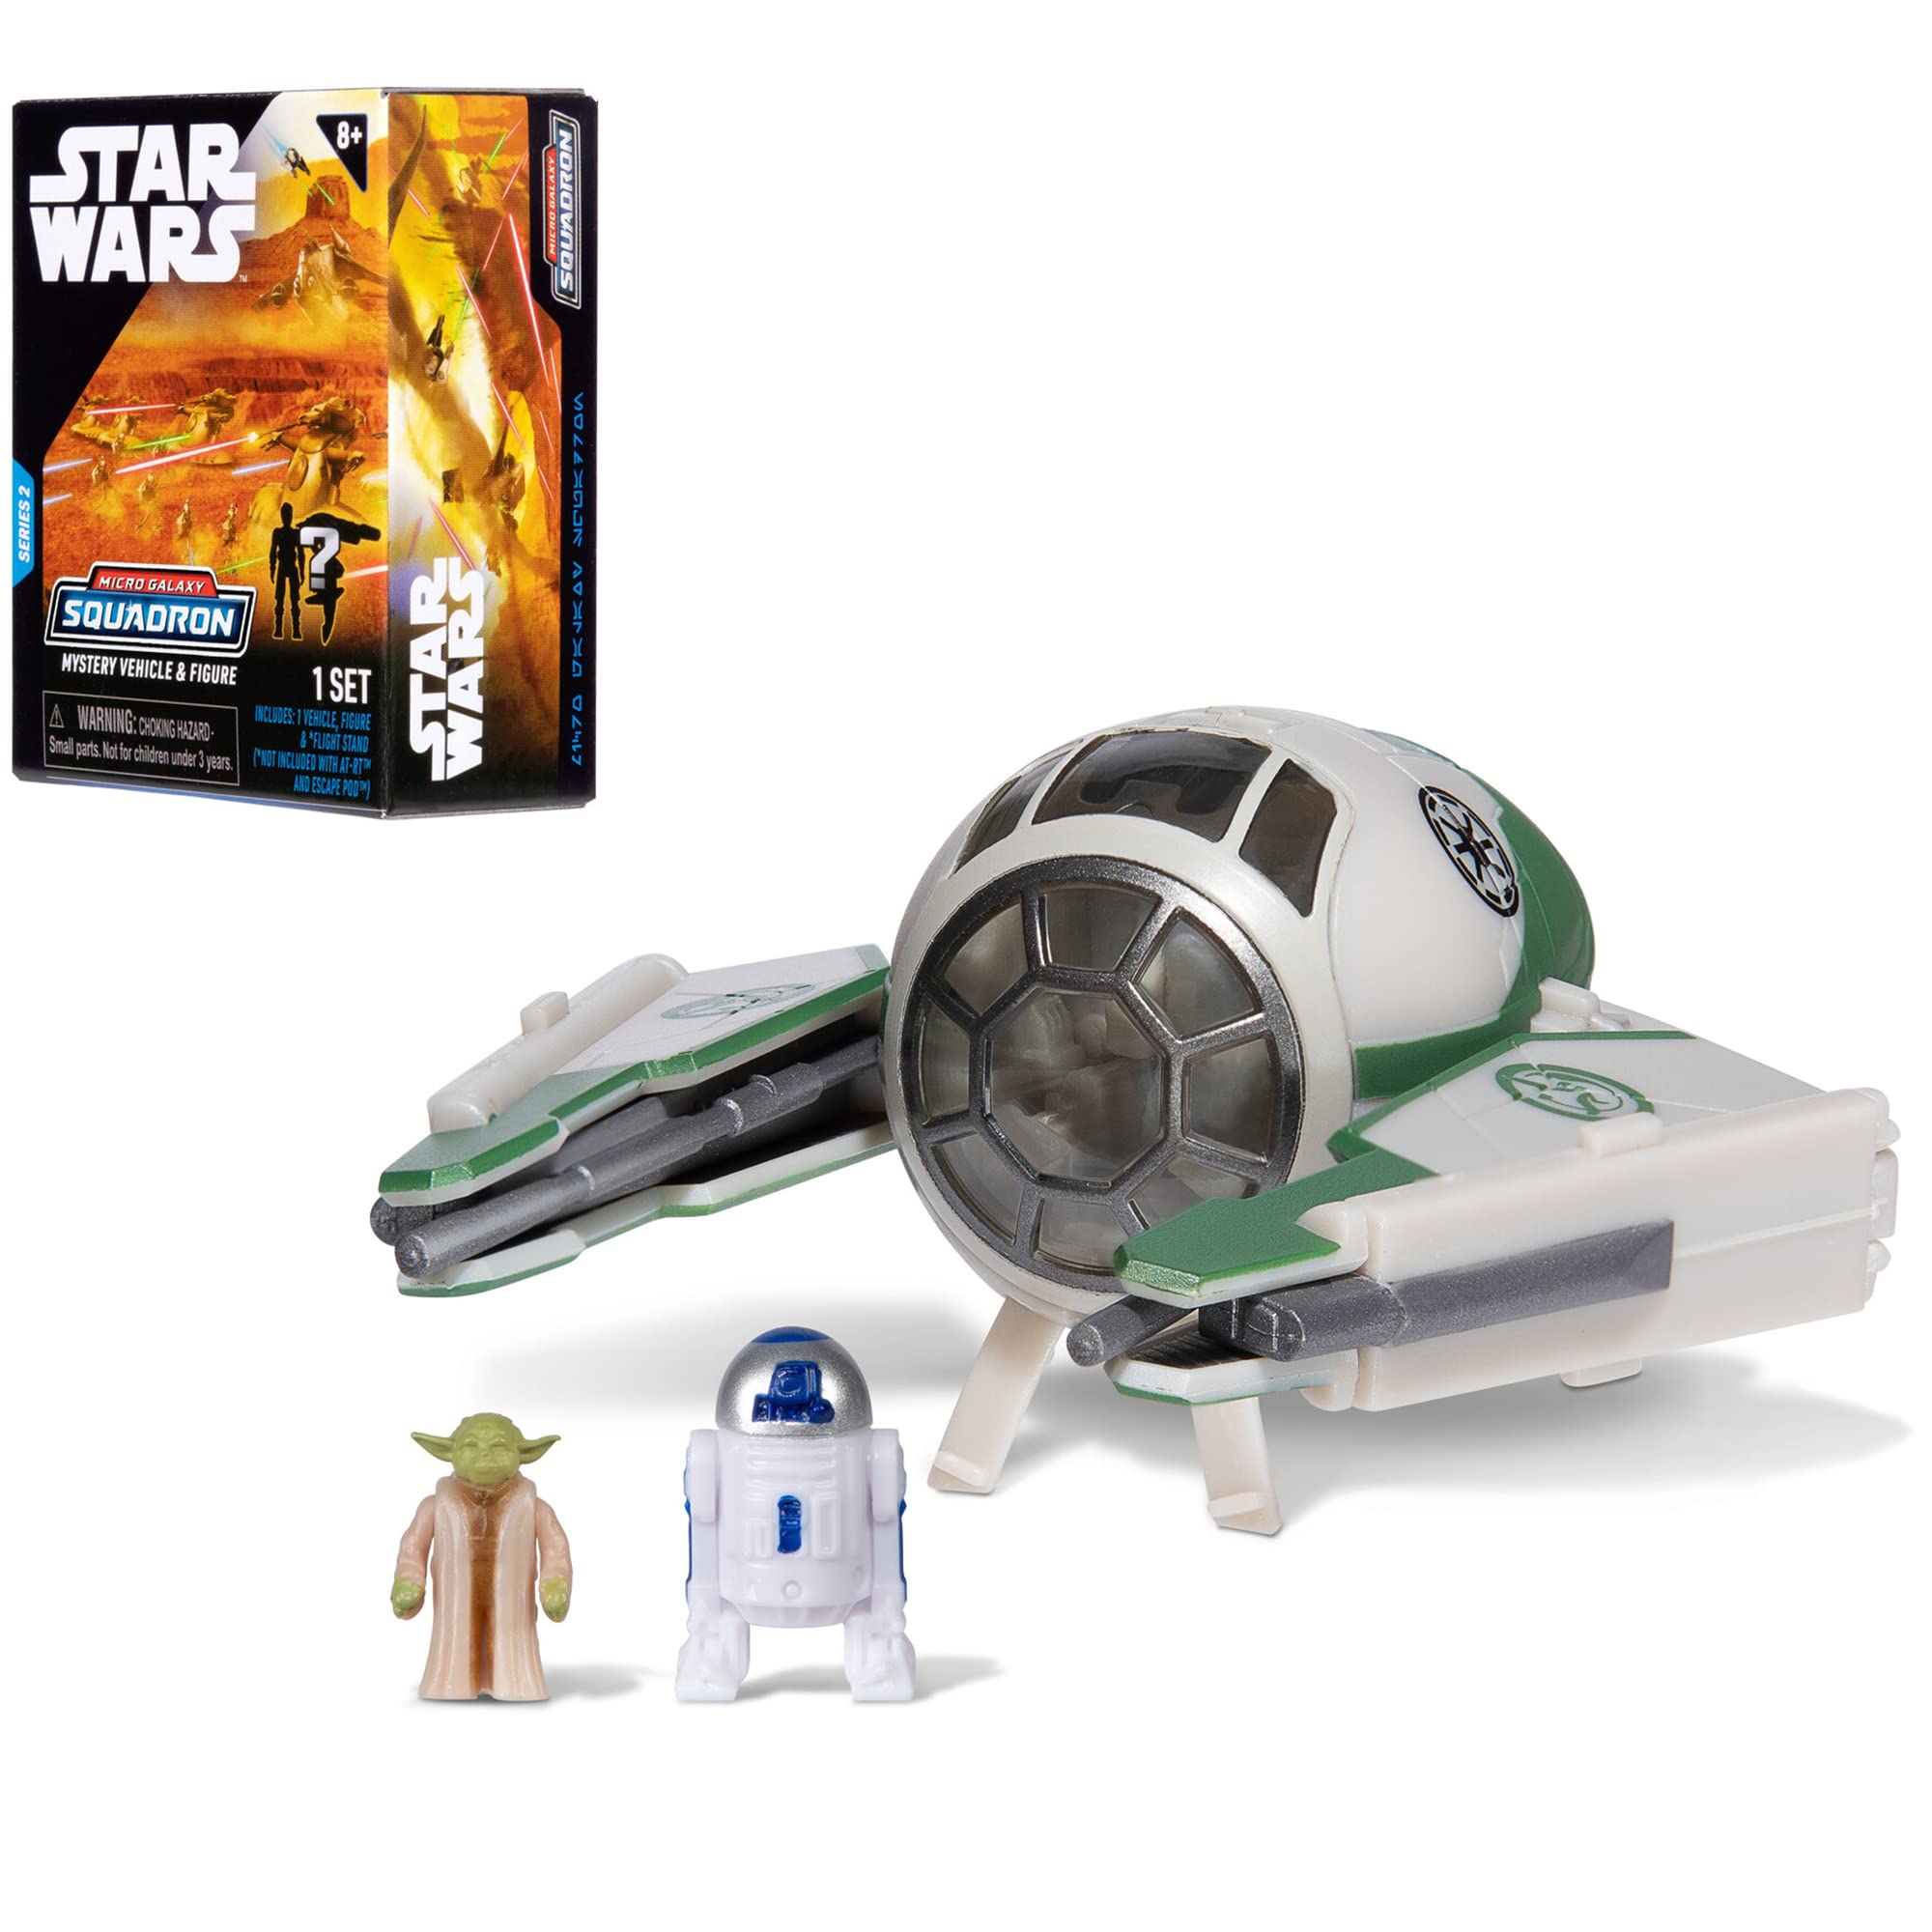 STAR WARS Micro Galaxy Squadron Jedi Starfighter (Yoda) Mystery Bundle - 3-Inch Light Armor Class Vehicle and Scout Class Vehicle with Accessories - Amazon Exclusive